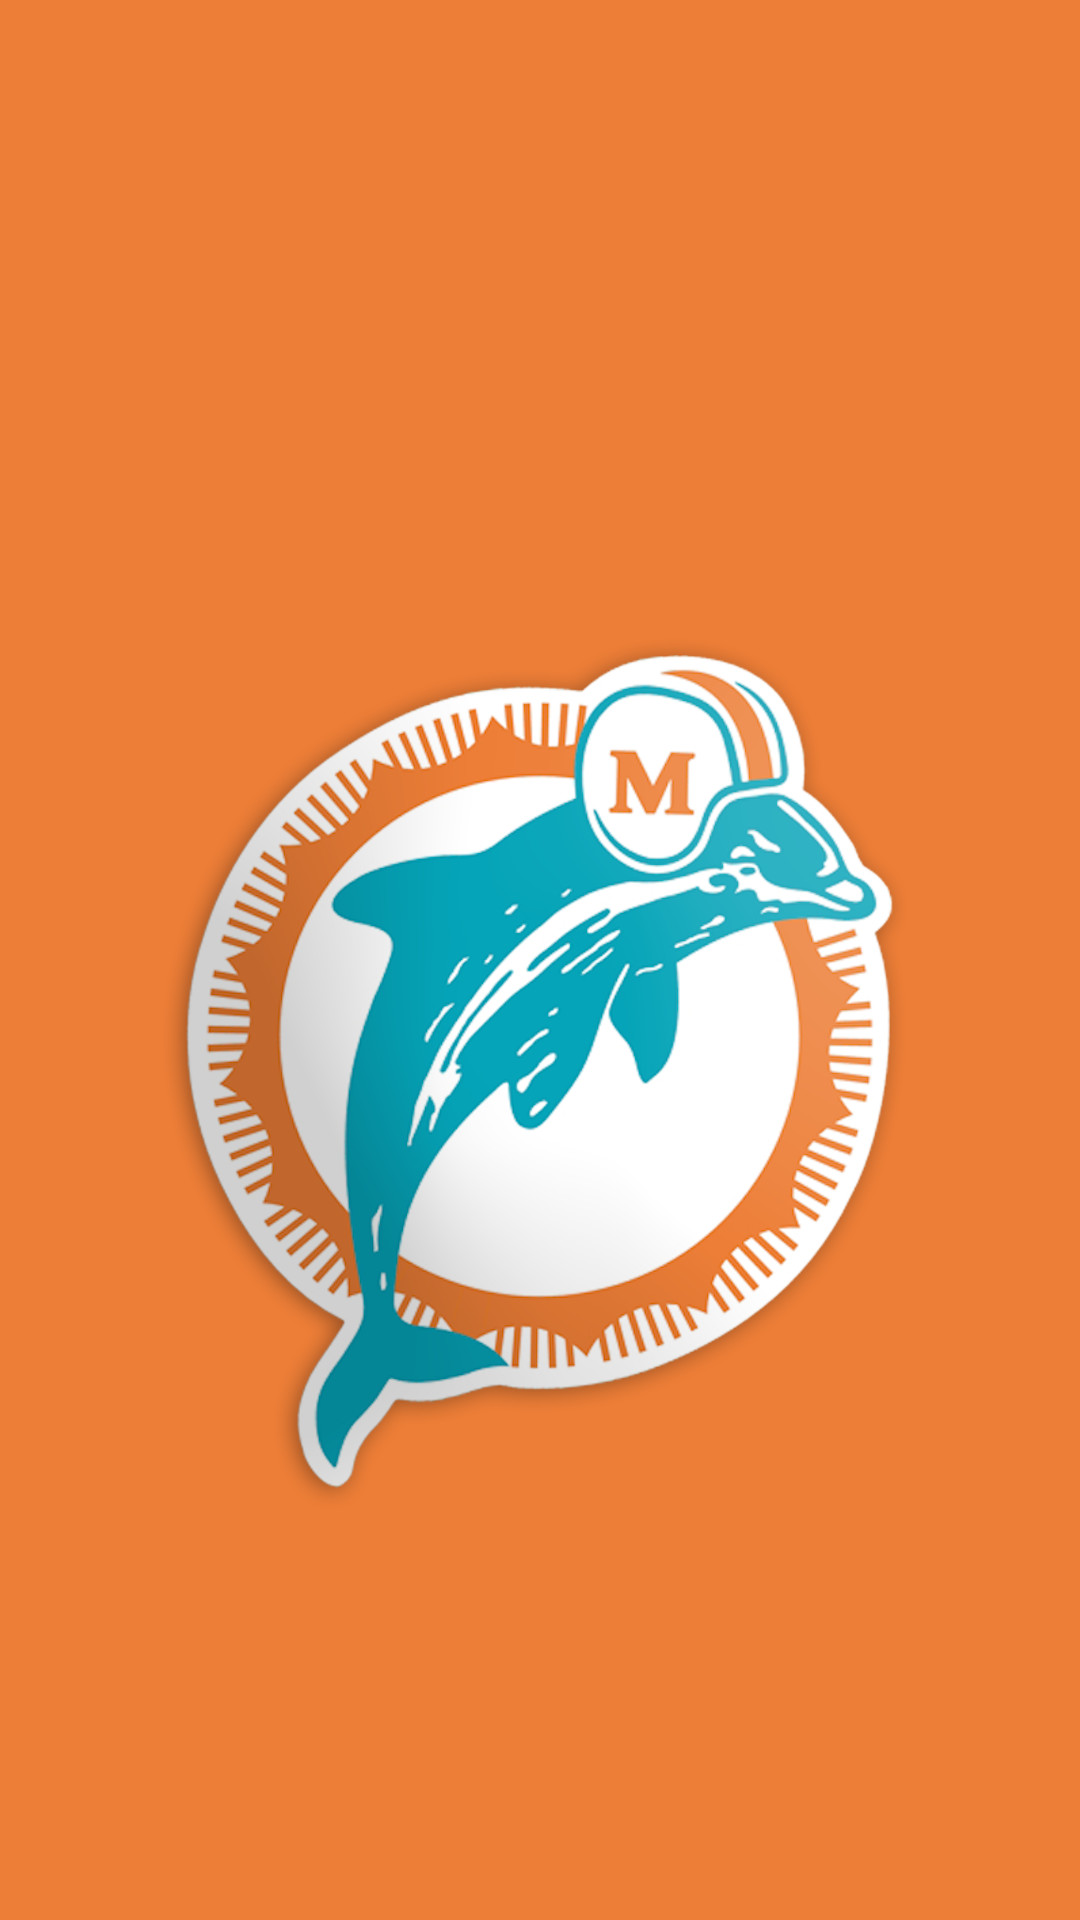 1080x1920 ( px) - Miami Dolphins IPhone Wallpapers - HD Wallpapers